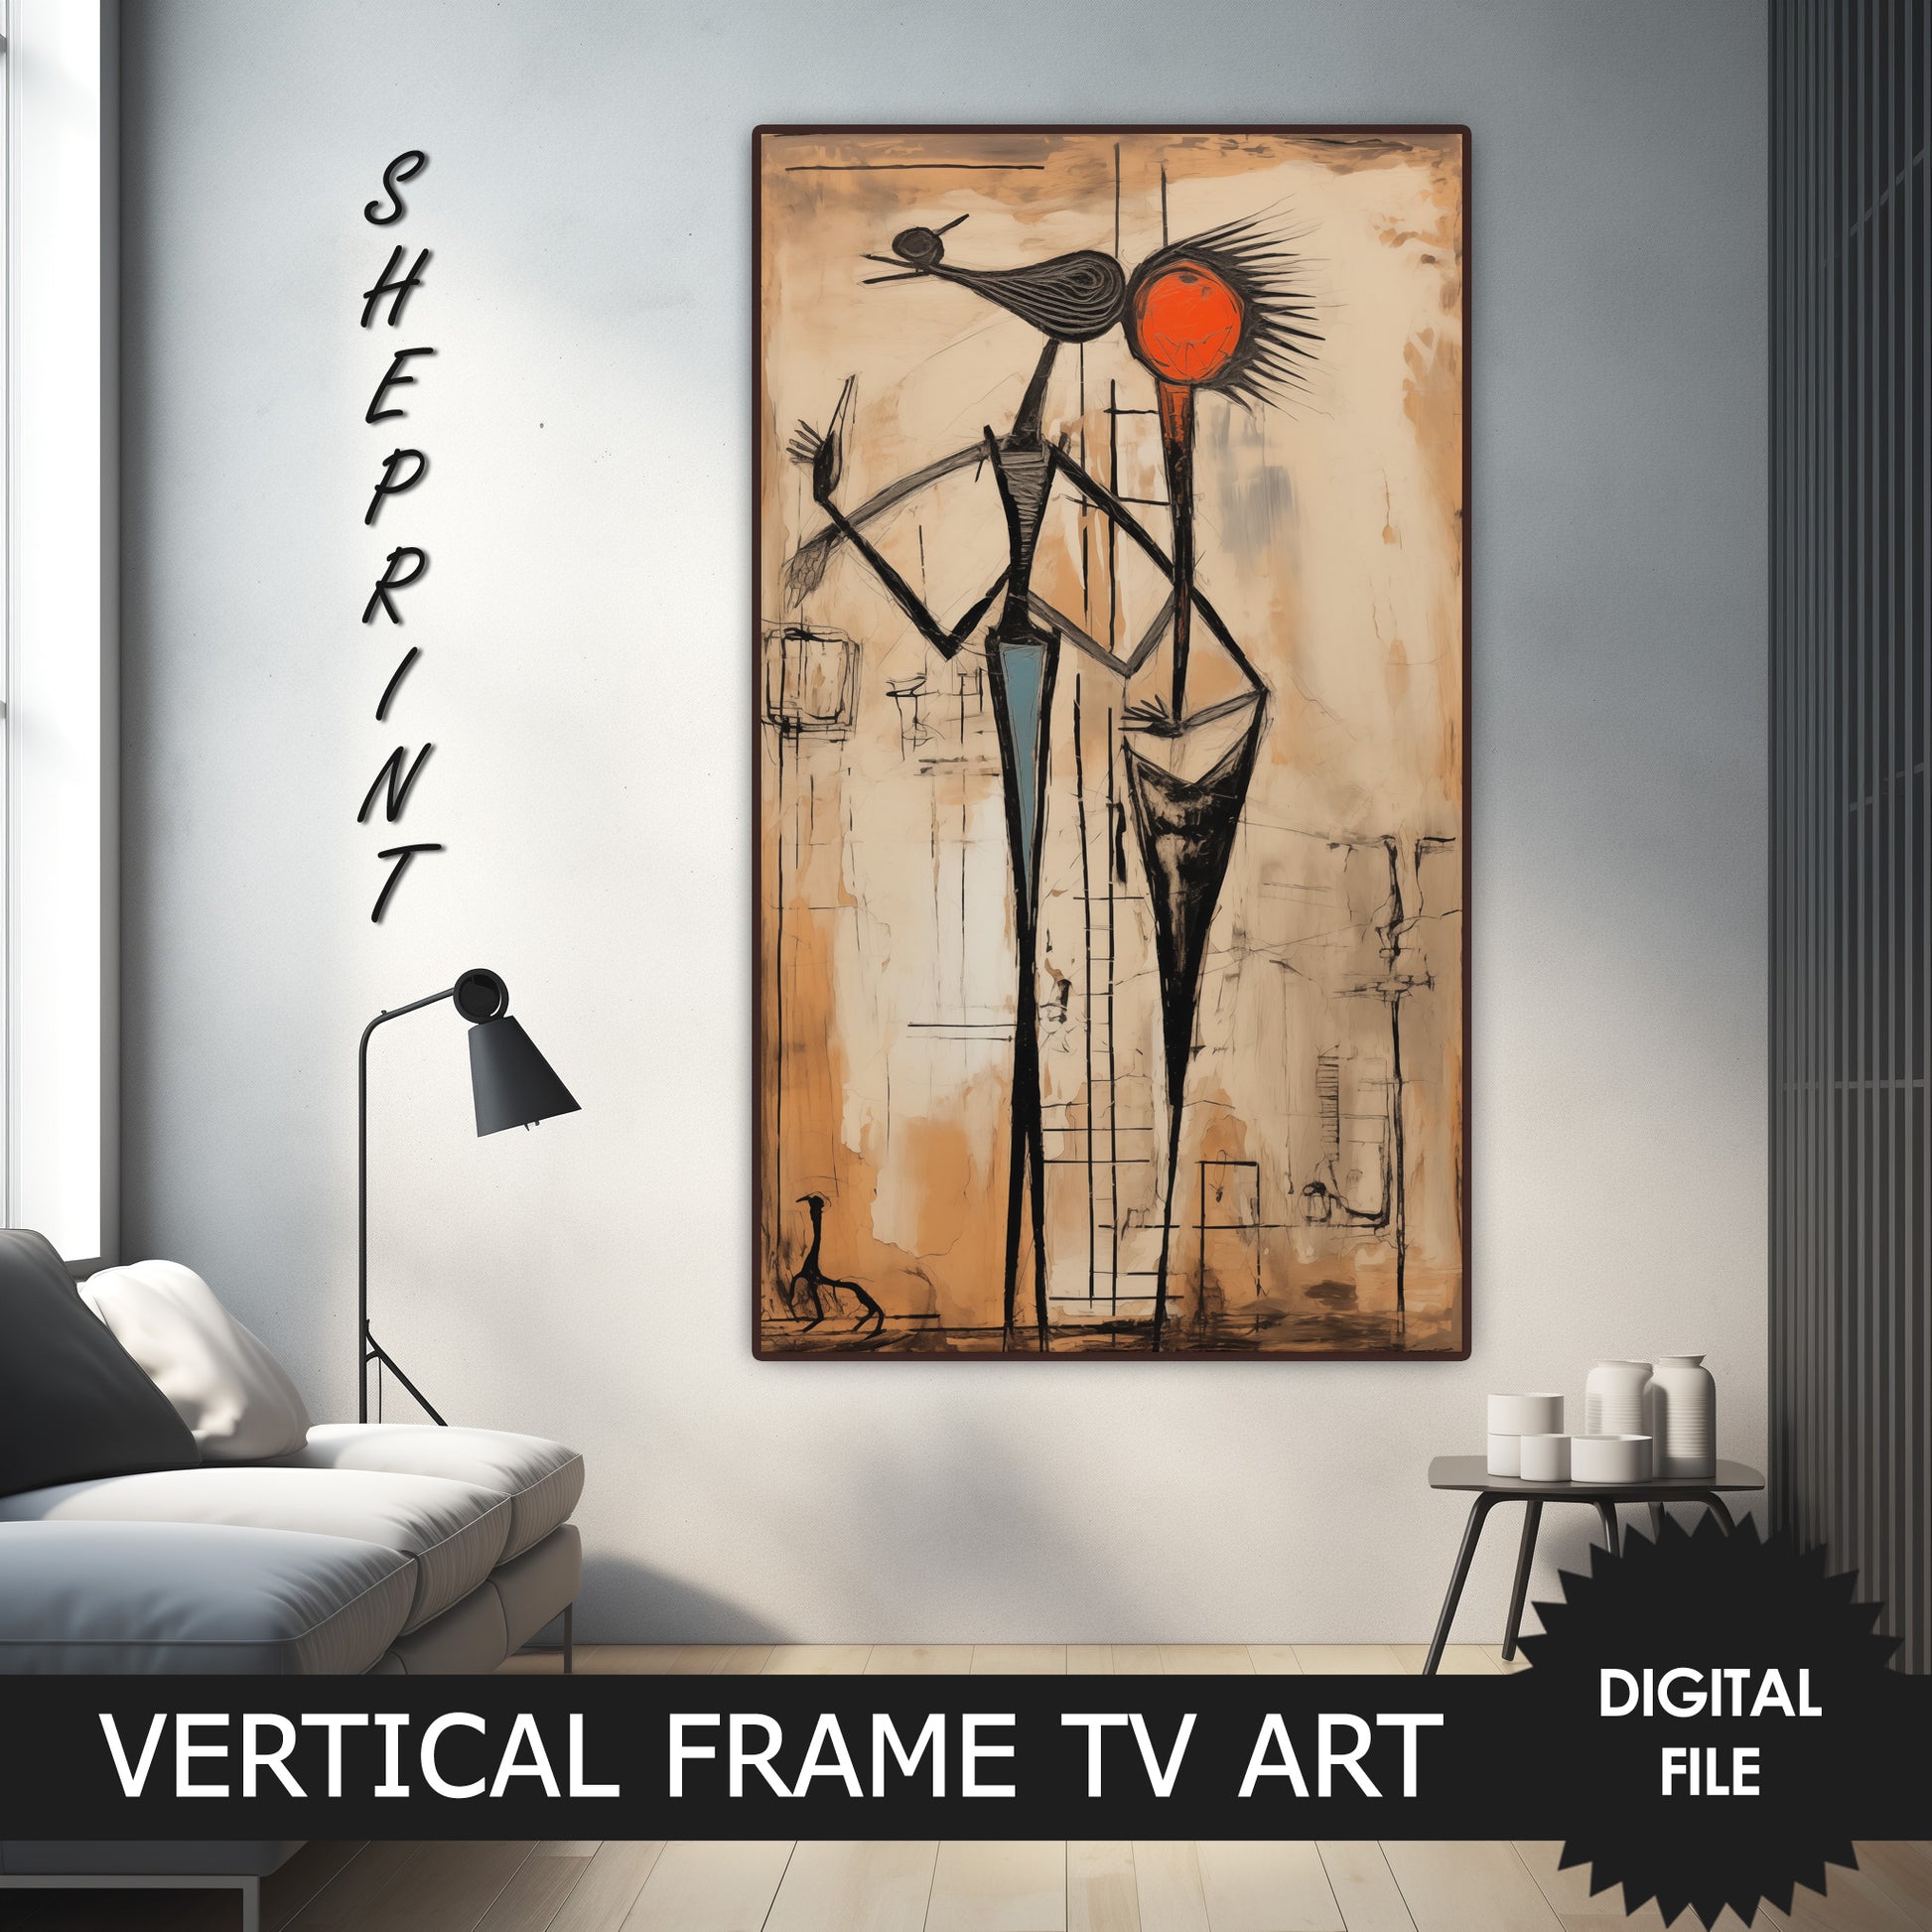 Vertical Frame TV Art, Couple Abstract Art, Oil Painting, Digital TV Art, JPEG Image, Instant Download preview on Samsung Frame TV when mounted vertically